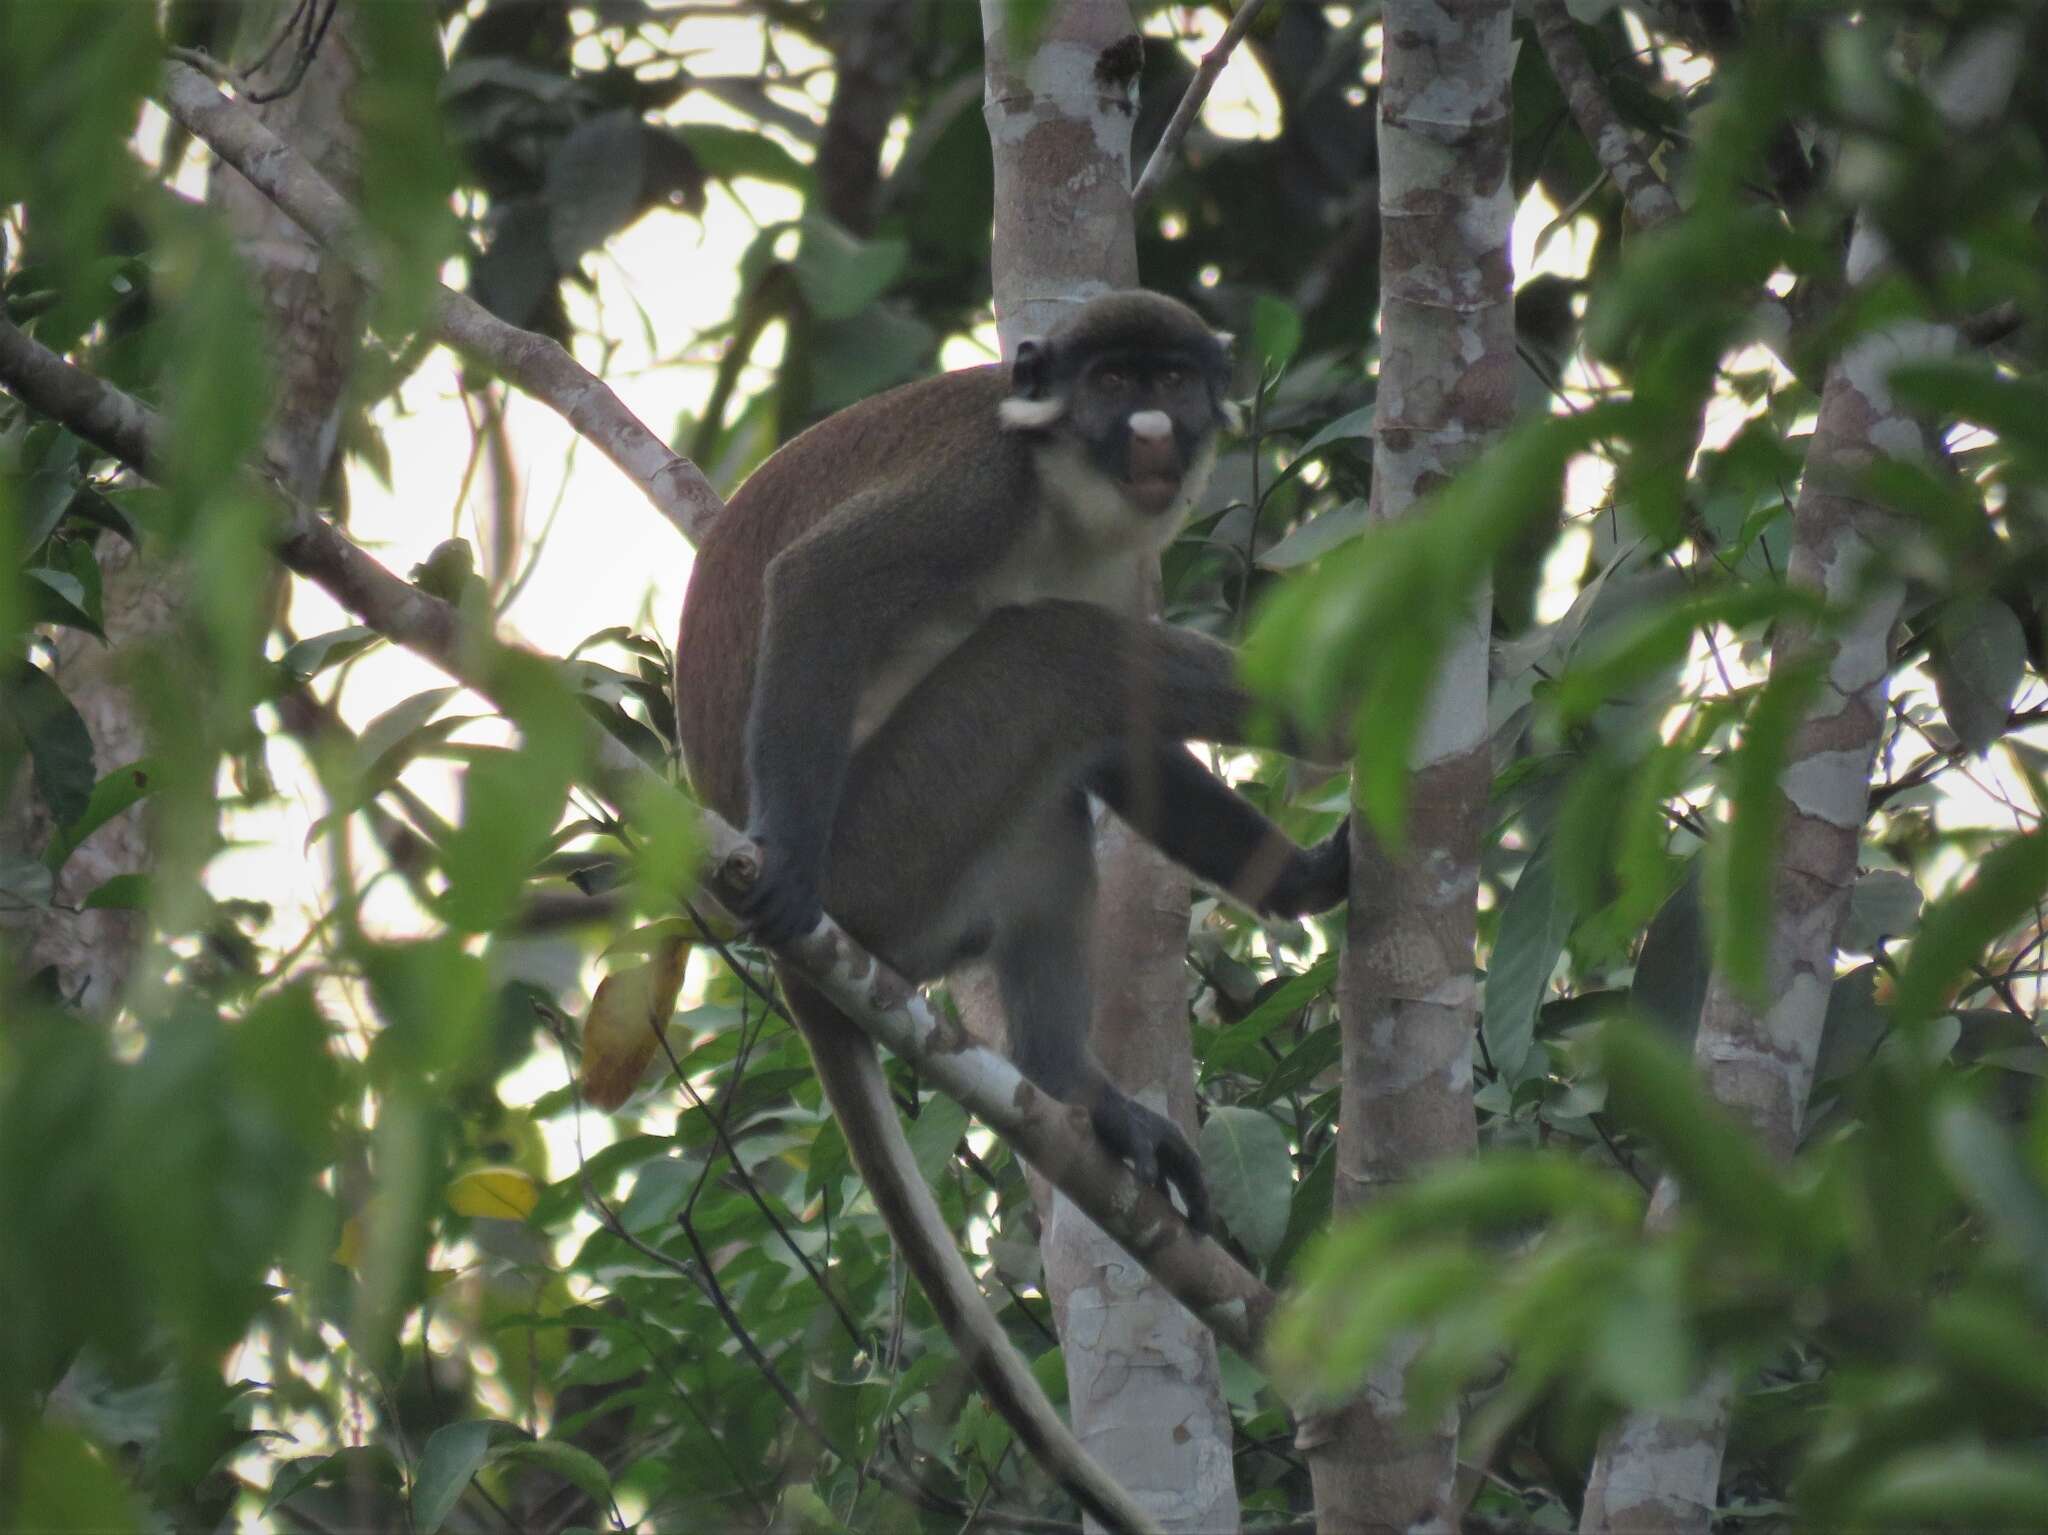 Image of Lesser Spot-nosed Guenon